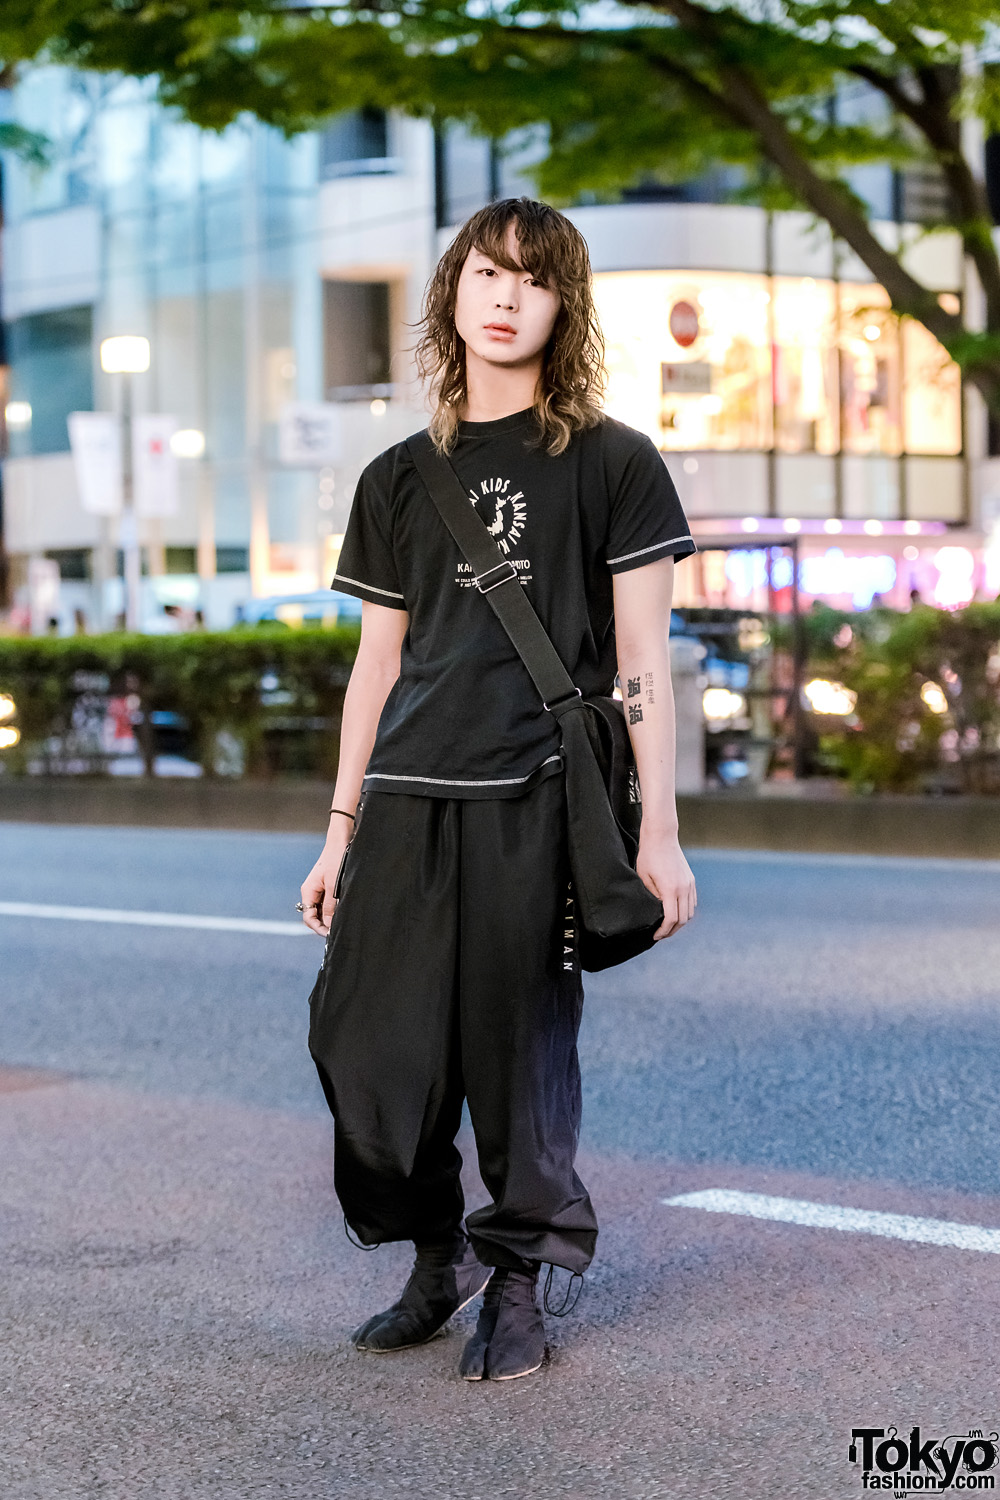 Fashion College Student in All Black Kansai Yamamoto Outfit w/ Crossbody Bag & Tabi Shoes